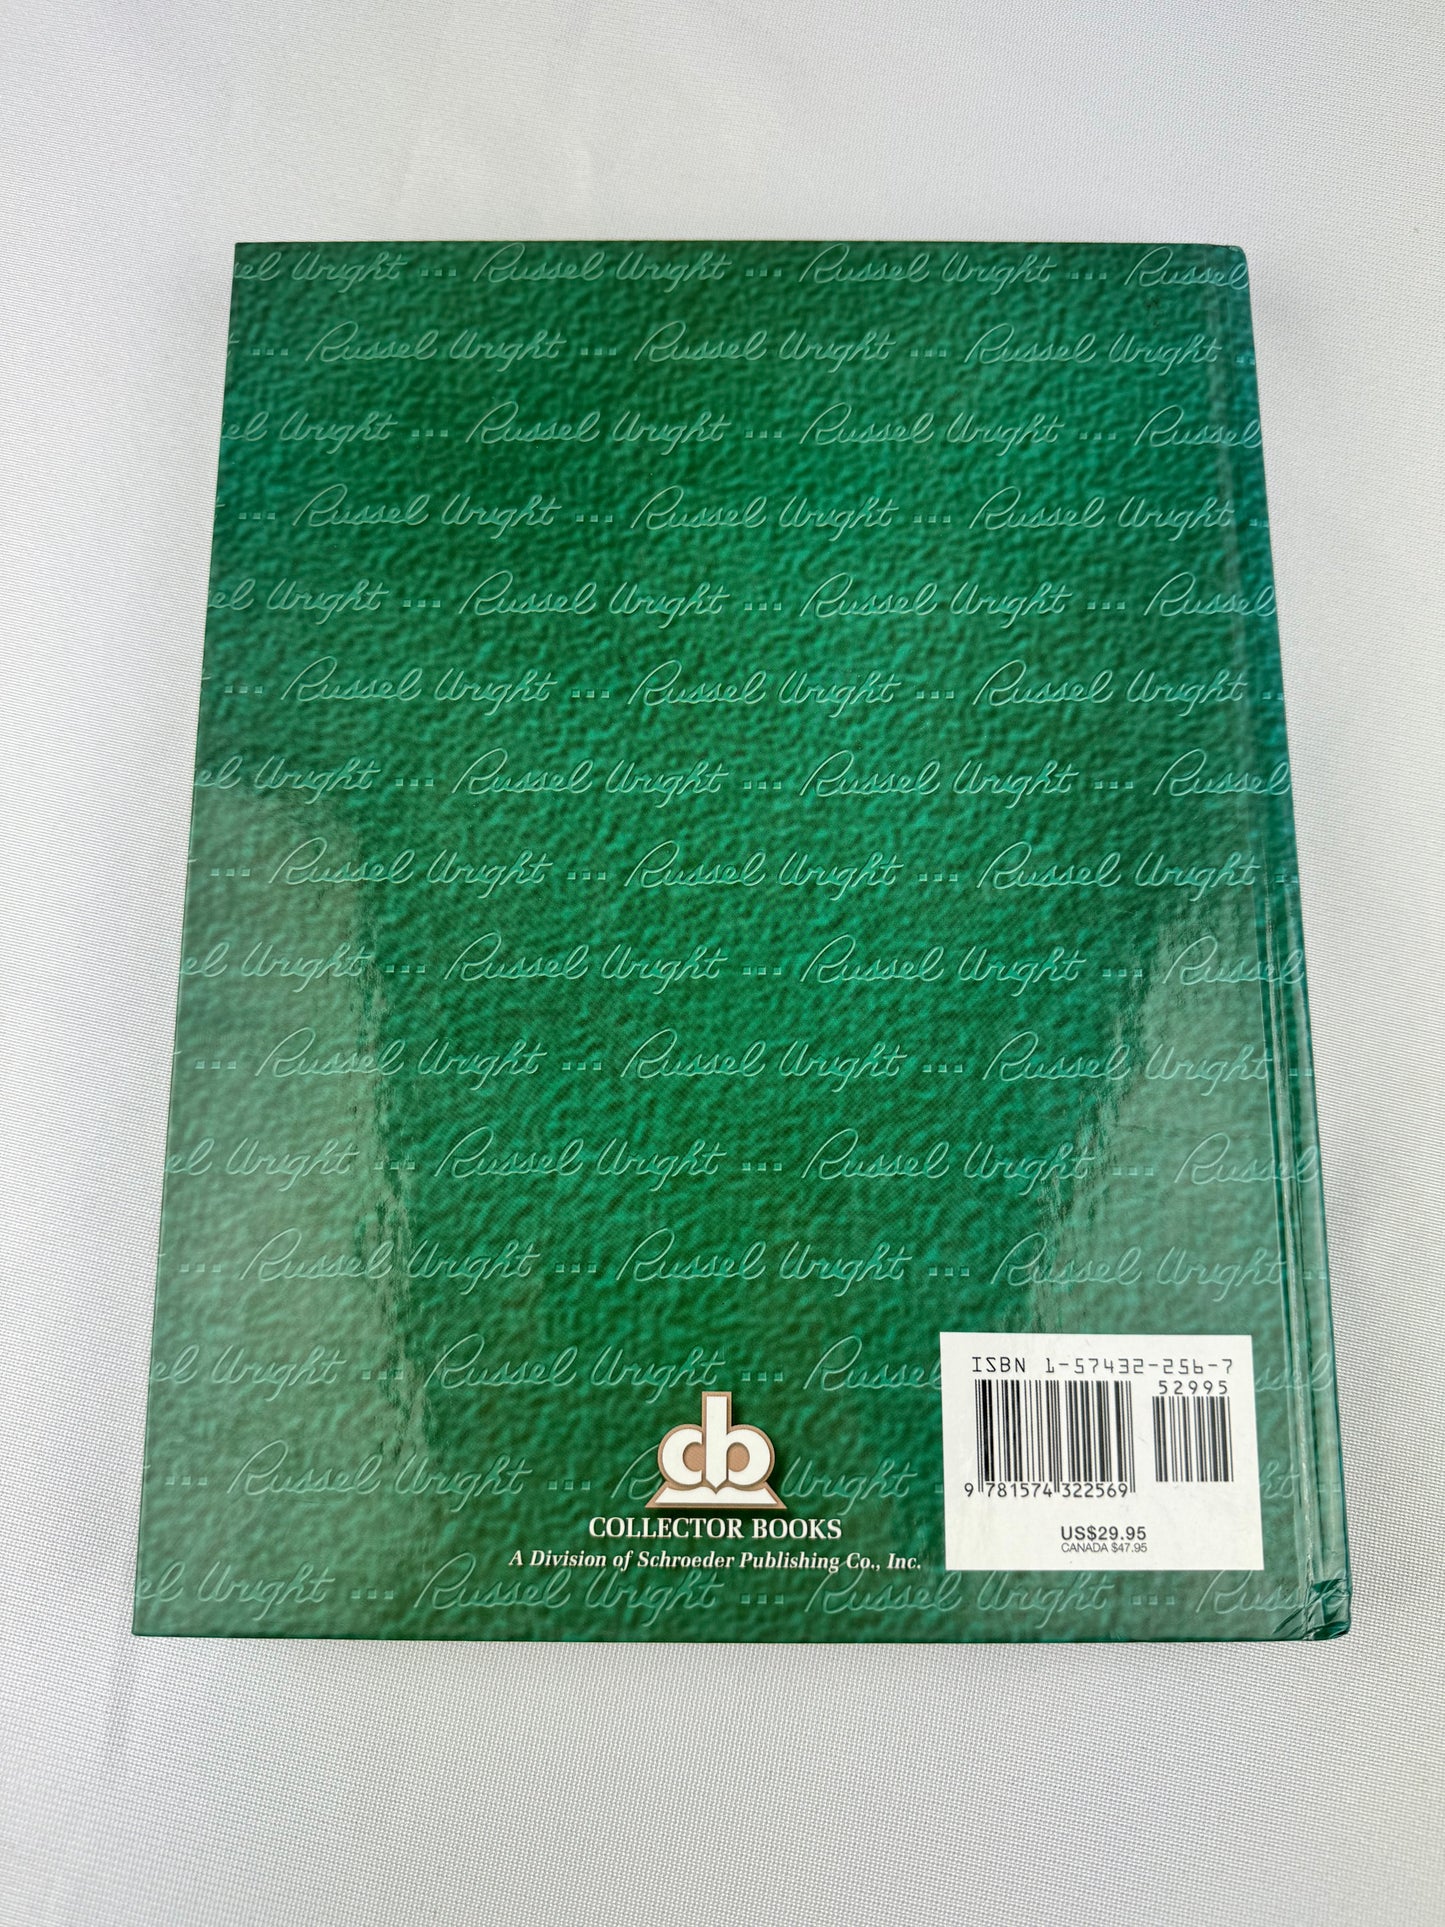 Collector's Encyclopedia of Russell Wright: Identification & Values, Third Edition, 2002